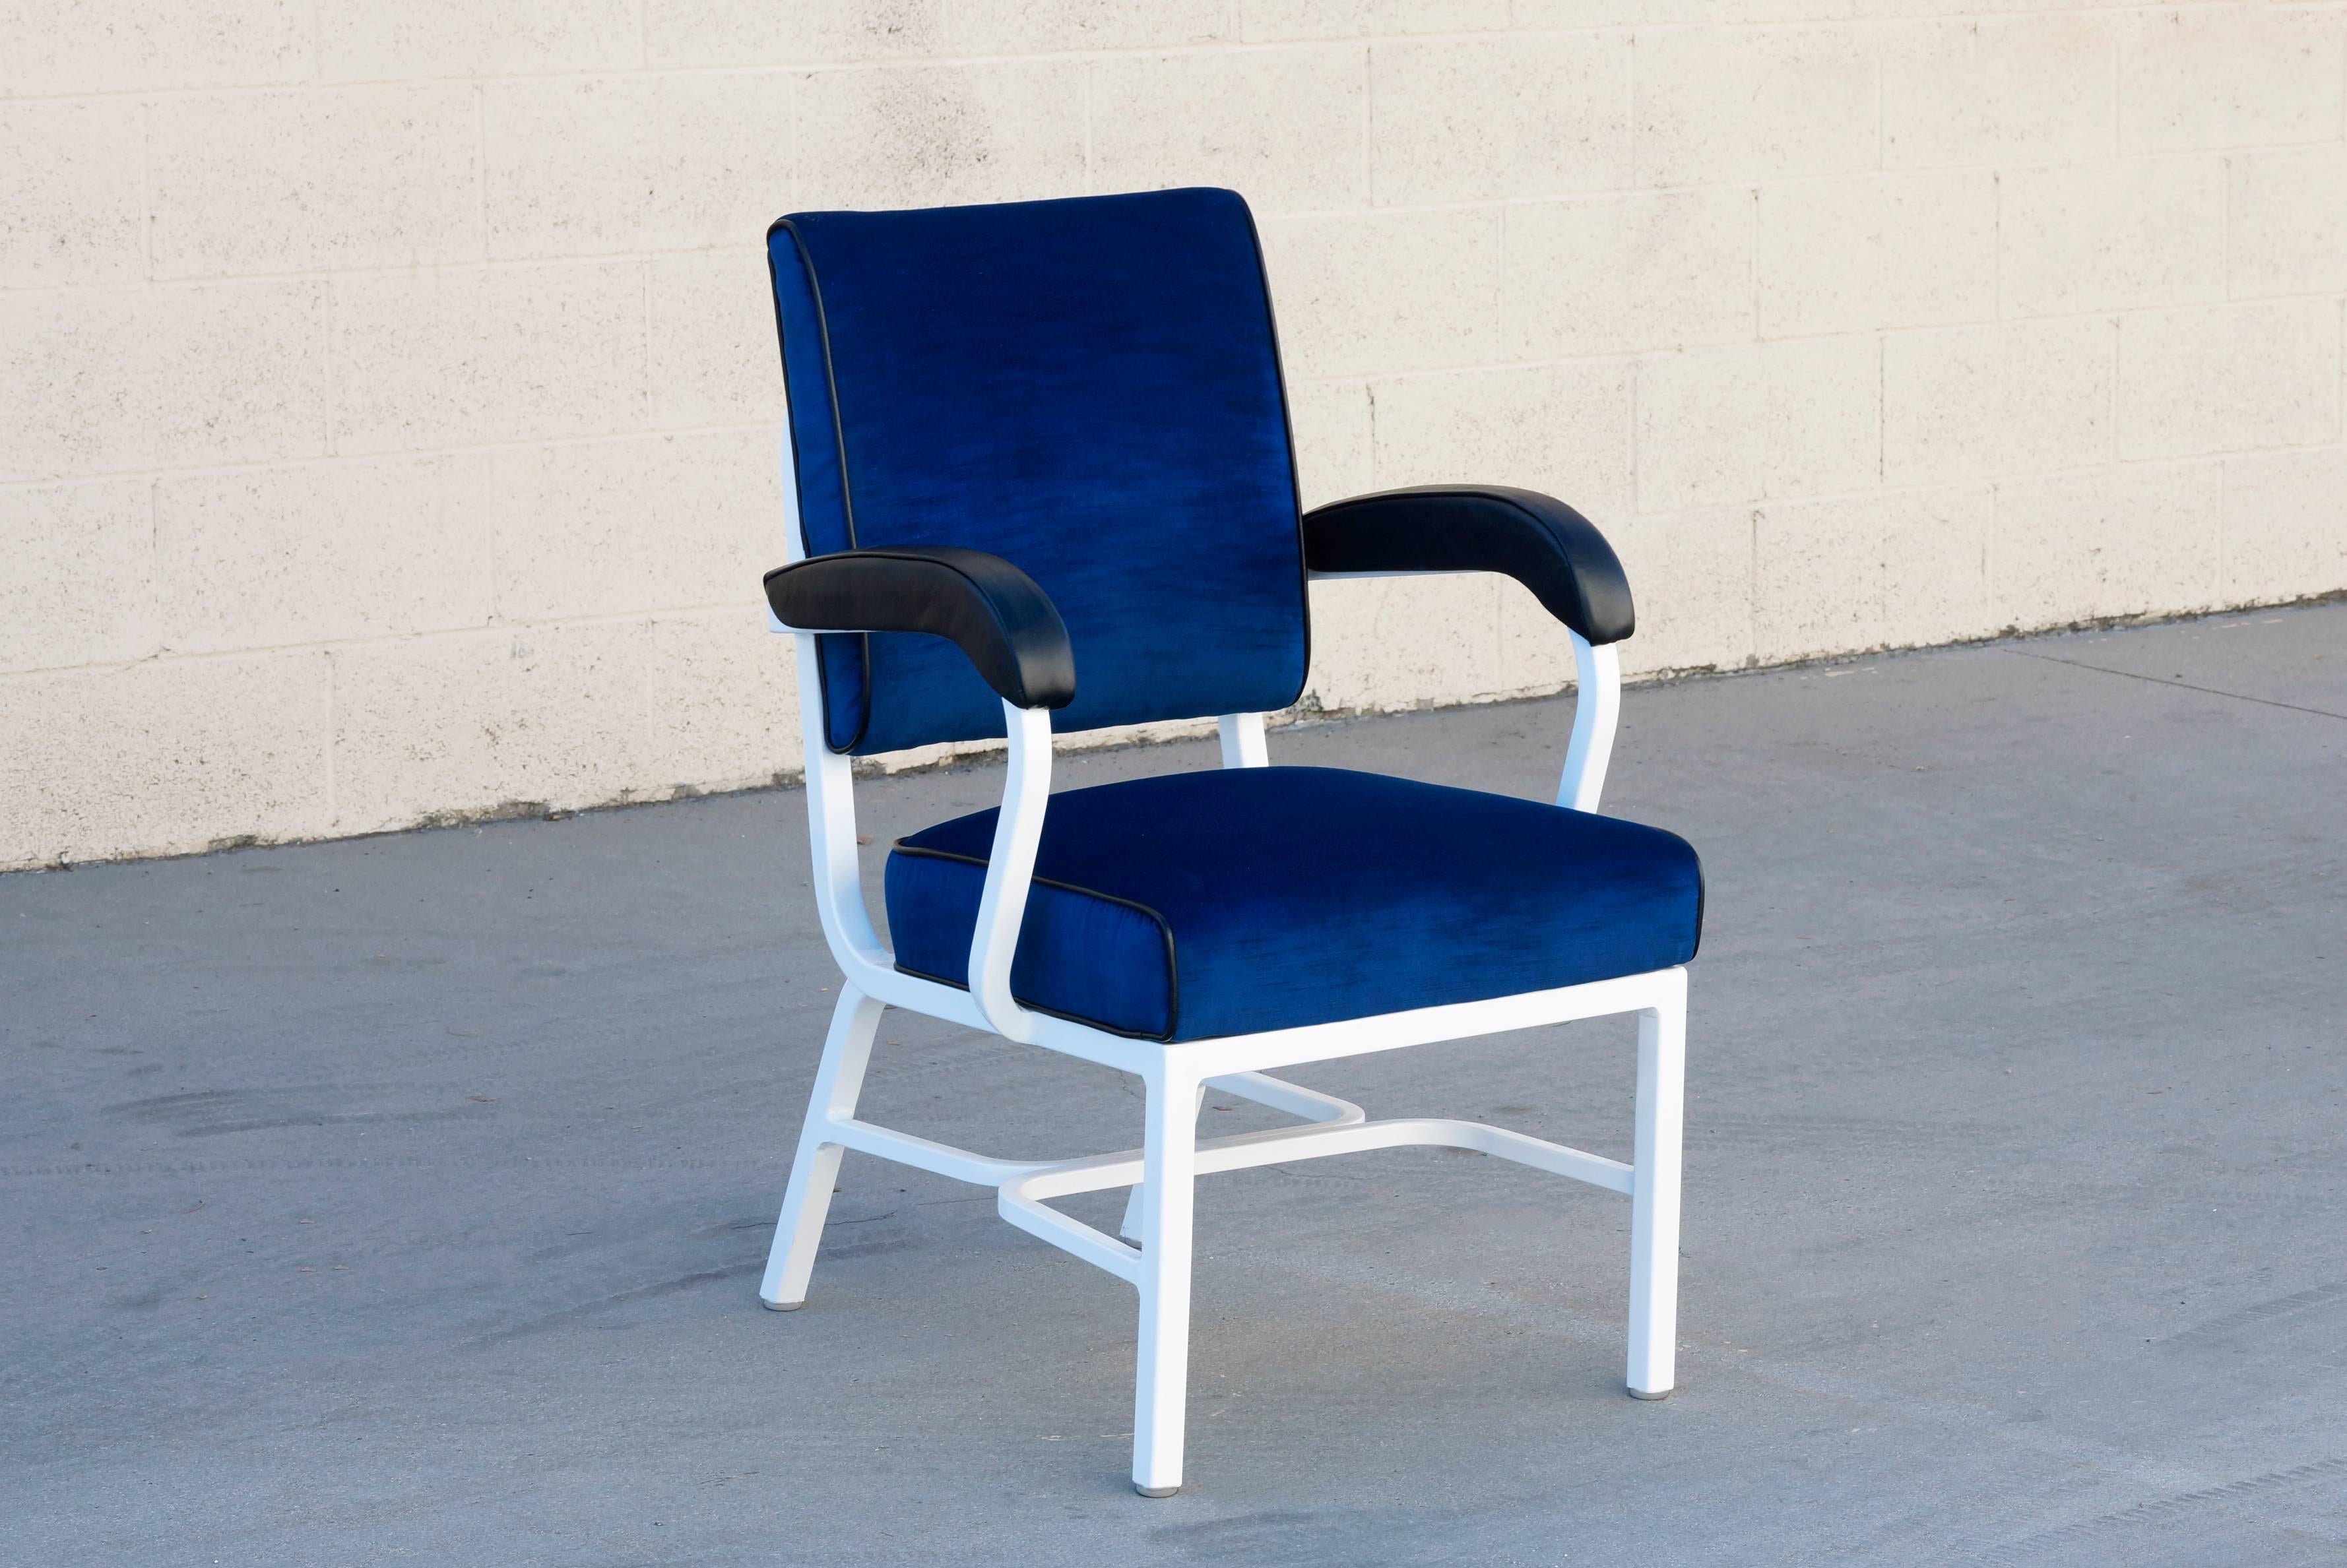 This fantastic, 1950s tanker armchair by General Fireproofing Co. is the perfect addition to your Mid-Century Modern workplace. Aluminum frame refinished in gloss white powder-coat. Seat reupholstered in high quality blue velvet with black leather